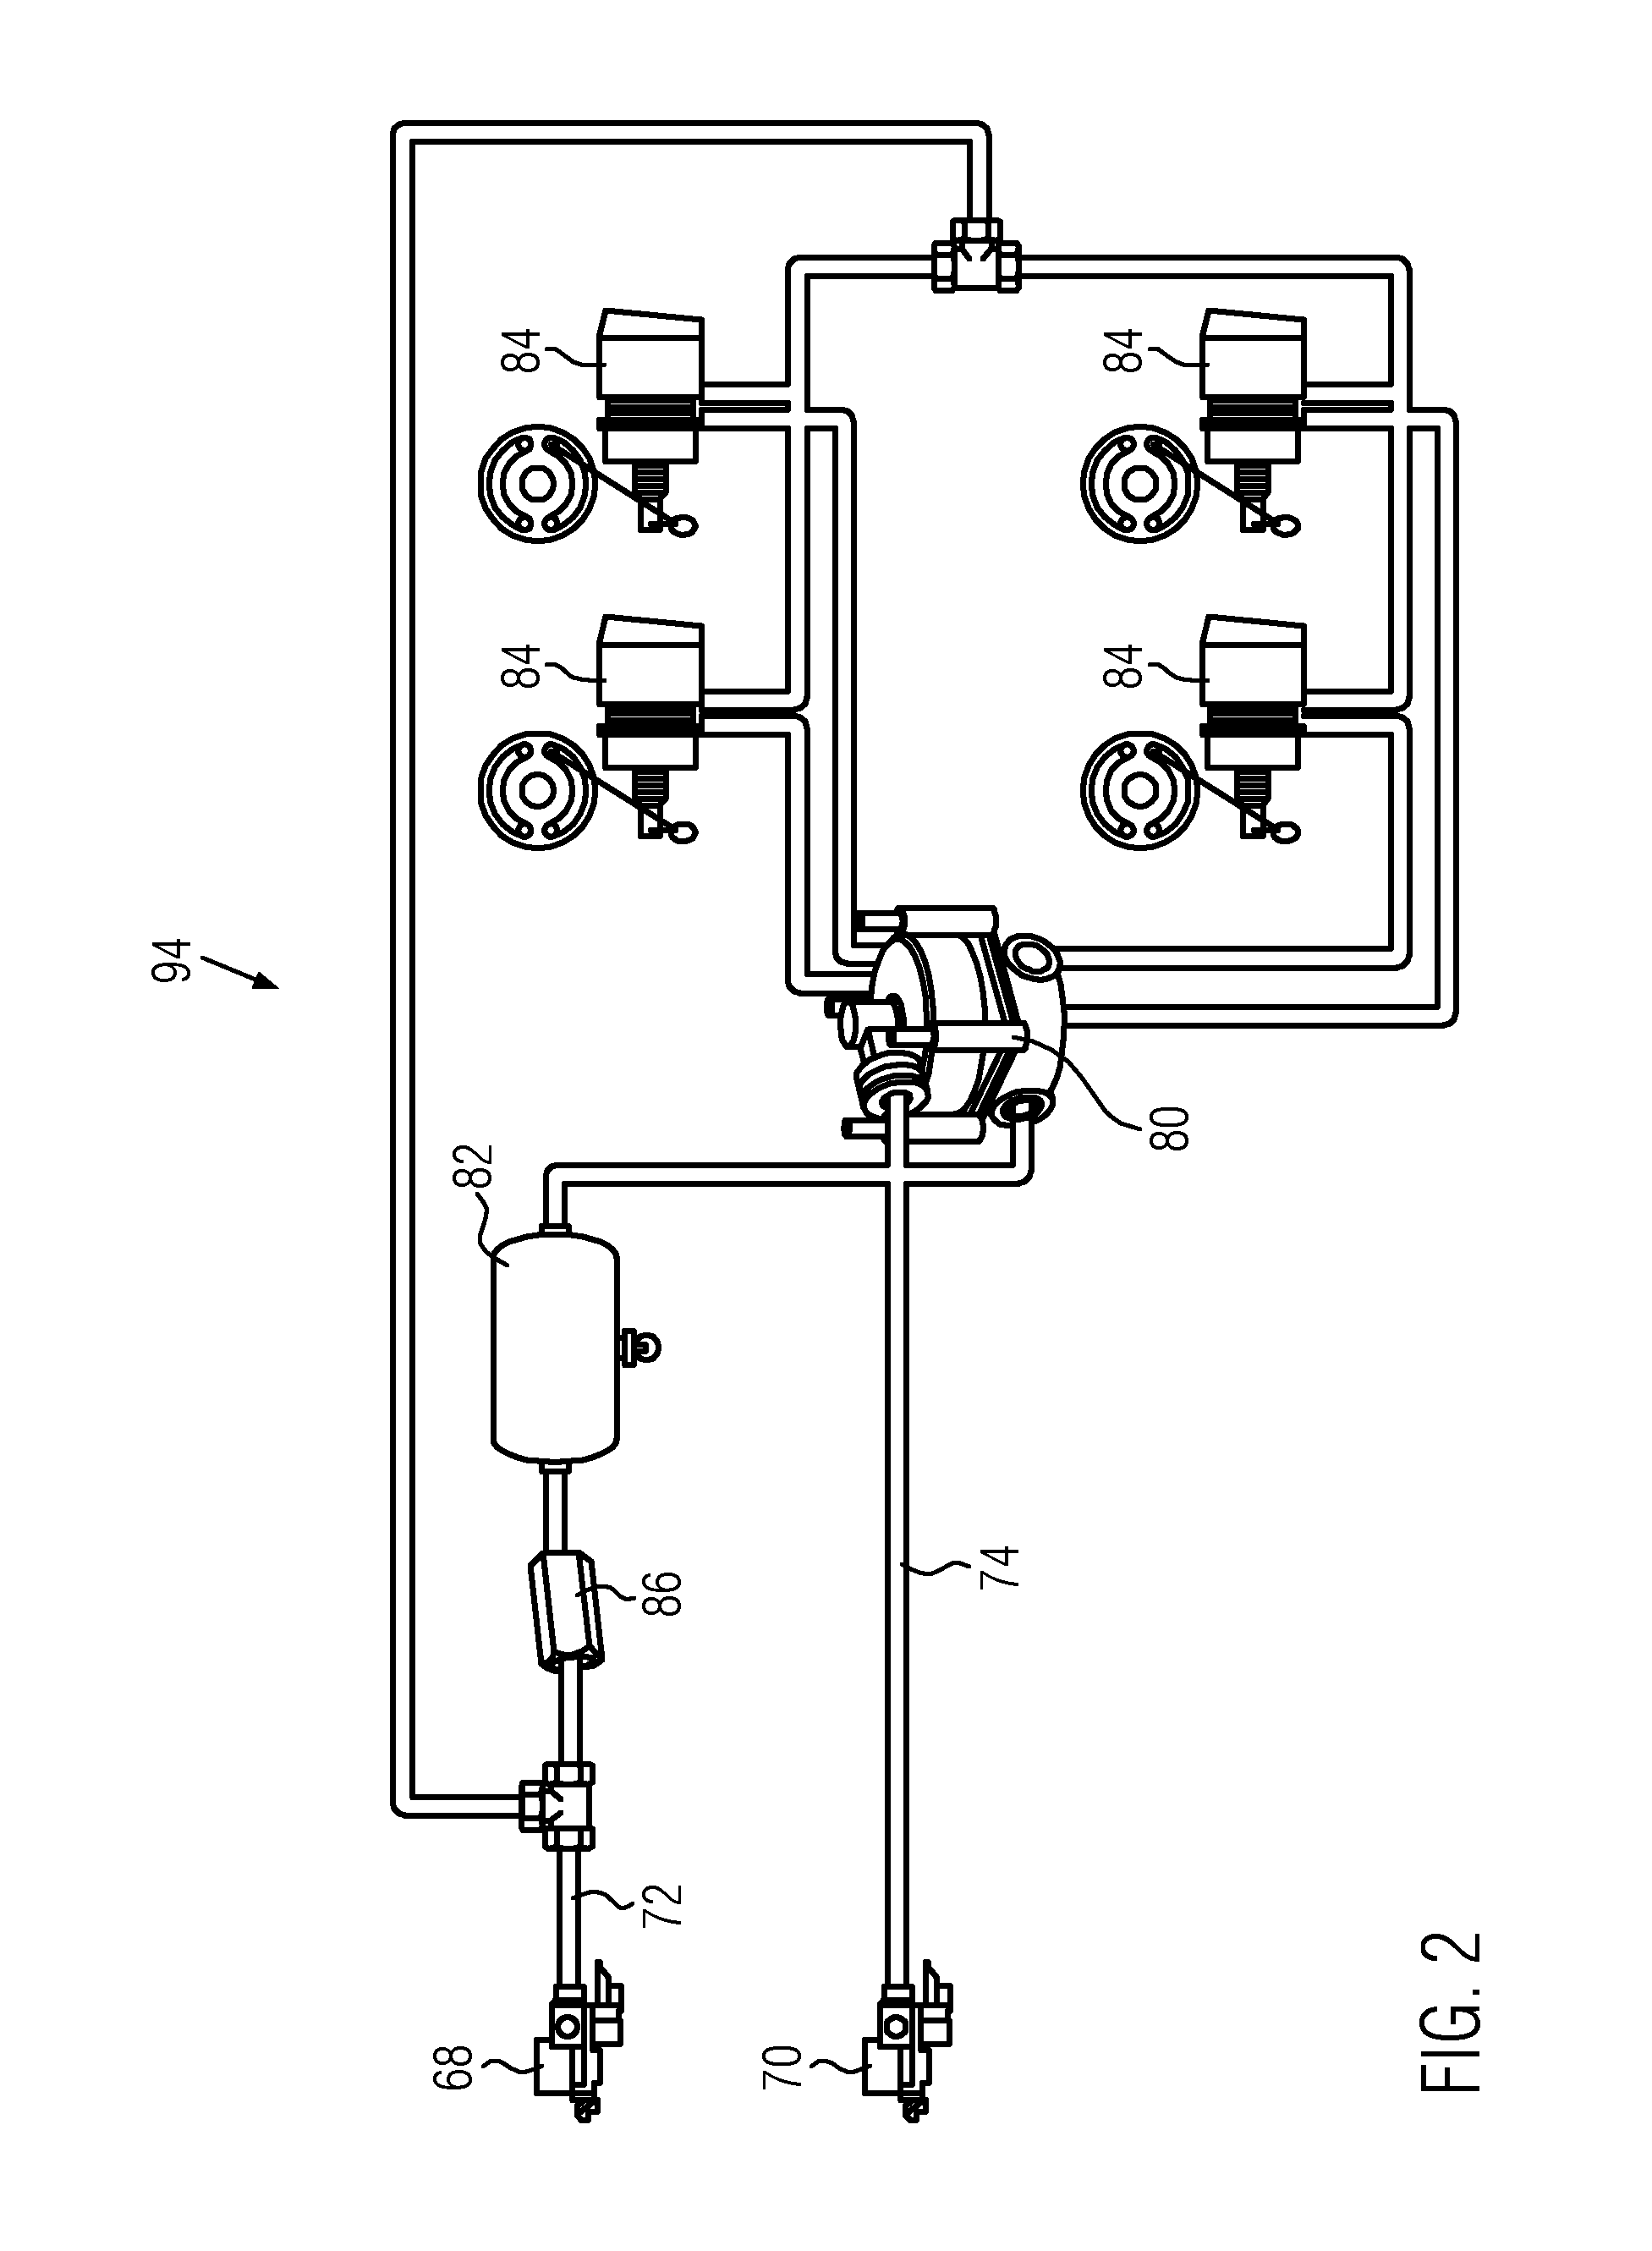 Method for braking a traction vehicle-trailer combination with reduced trailer braking force as a function of the response of the abs of the traction vehicle